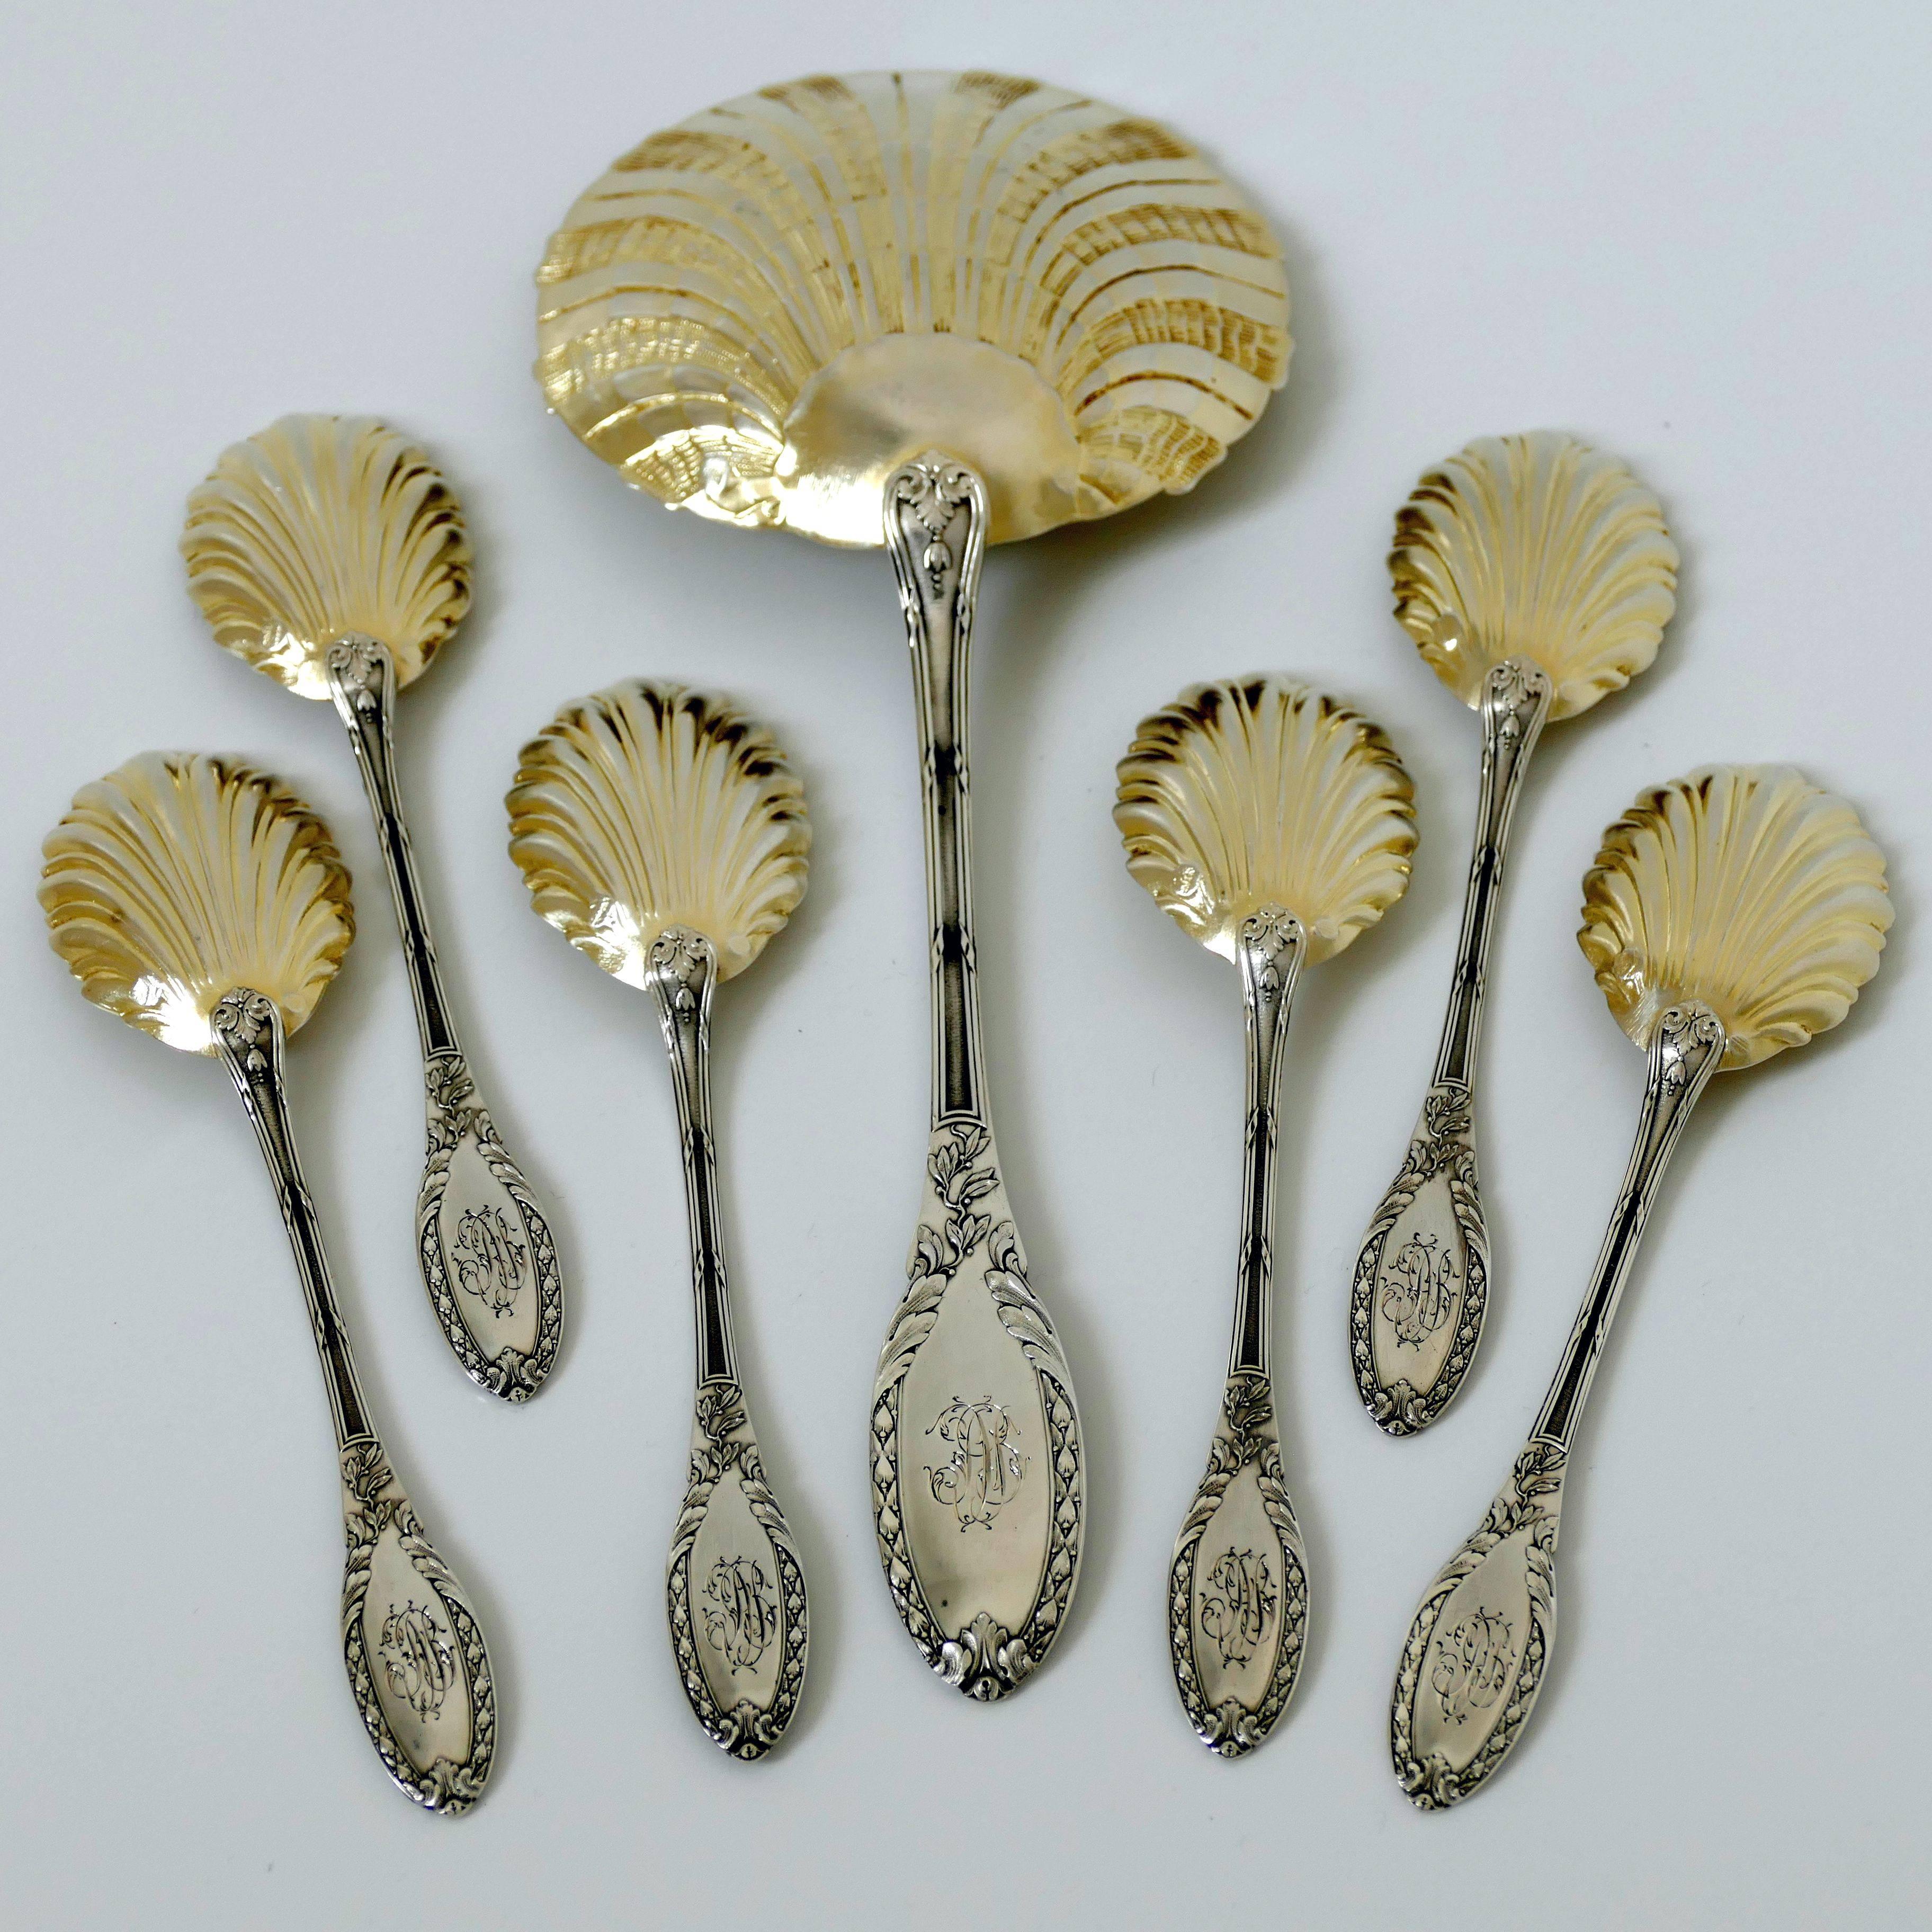 Rare French Sterling Silver 18-Karat Gold Strawberry Service Seven-Piece For Sale 2